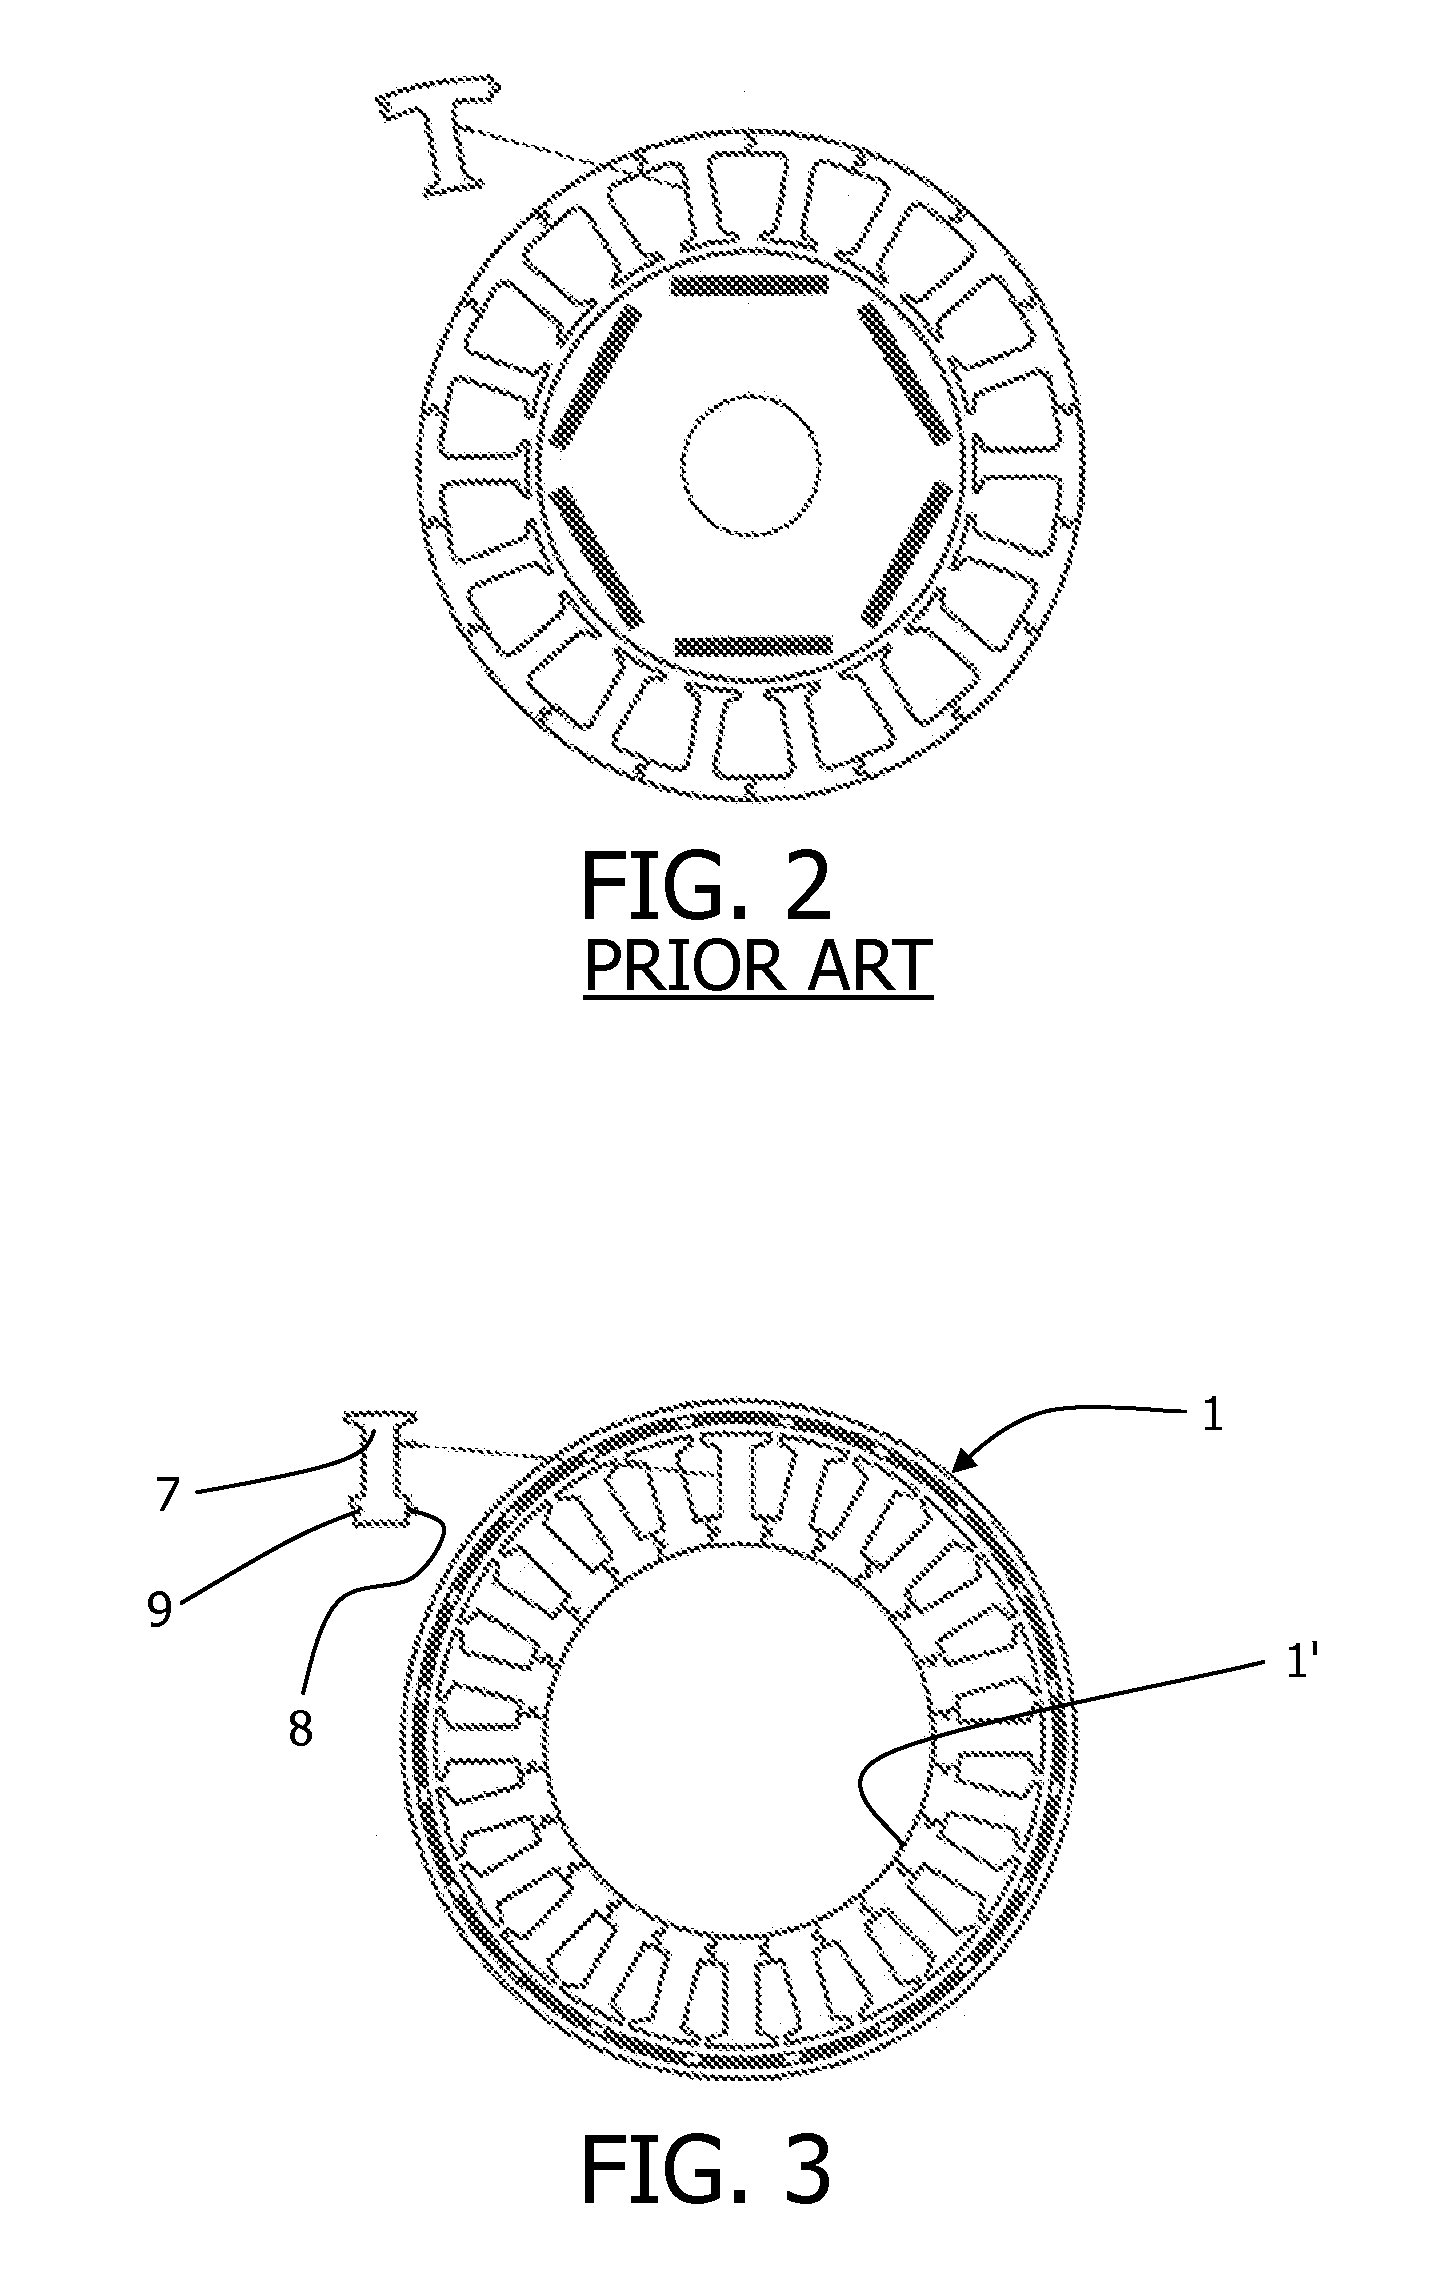 Segmented inner stator and brushless permanent magnet motor with the same